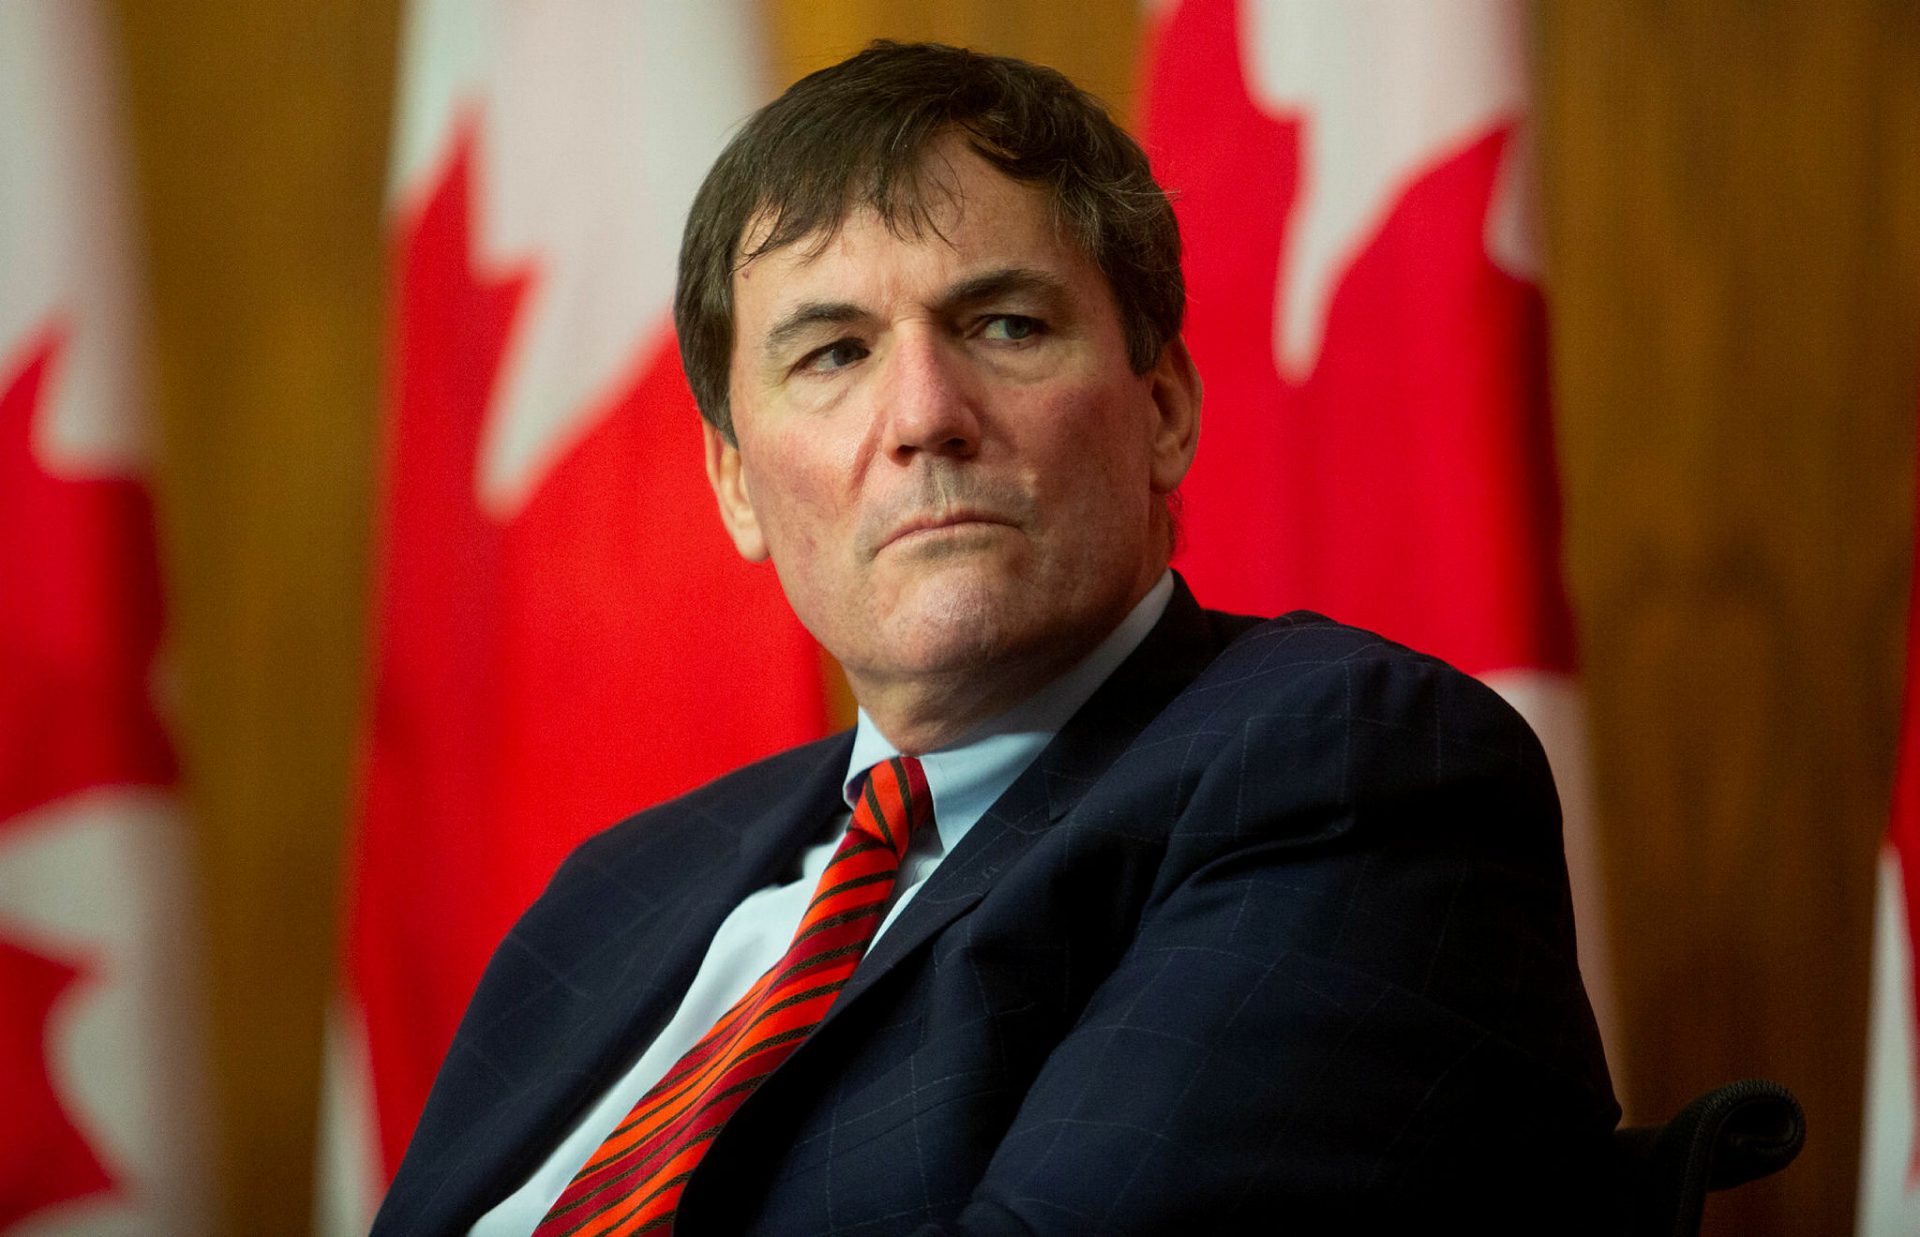 Intergovernmental Affairs Minister Dominic LeBlanc. The Hill Times photograph by Andrew Meade